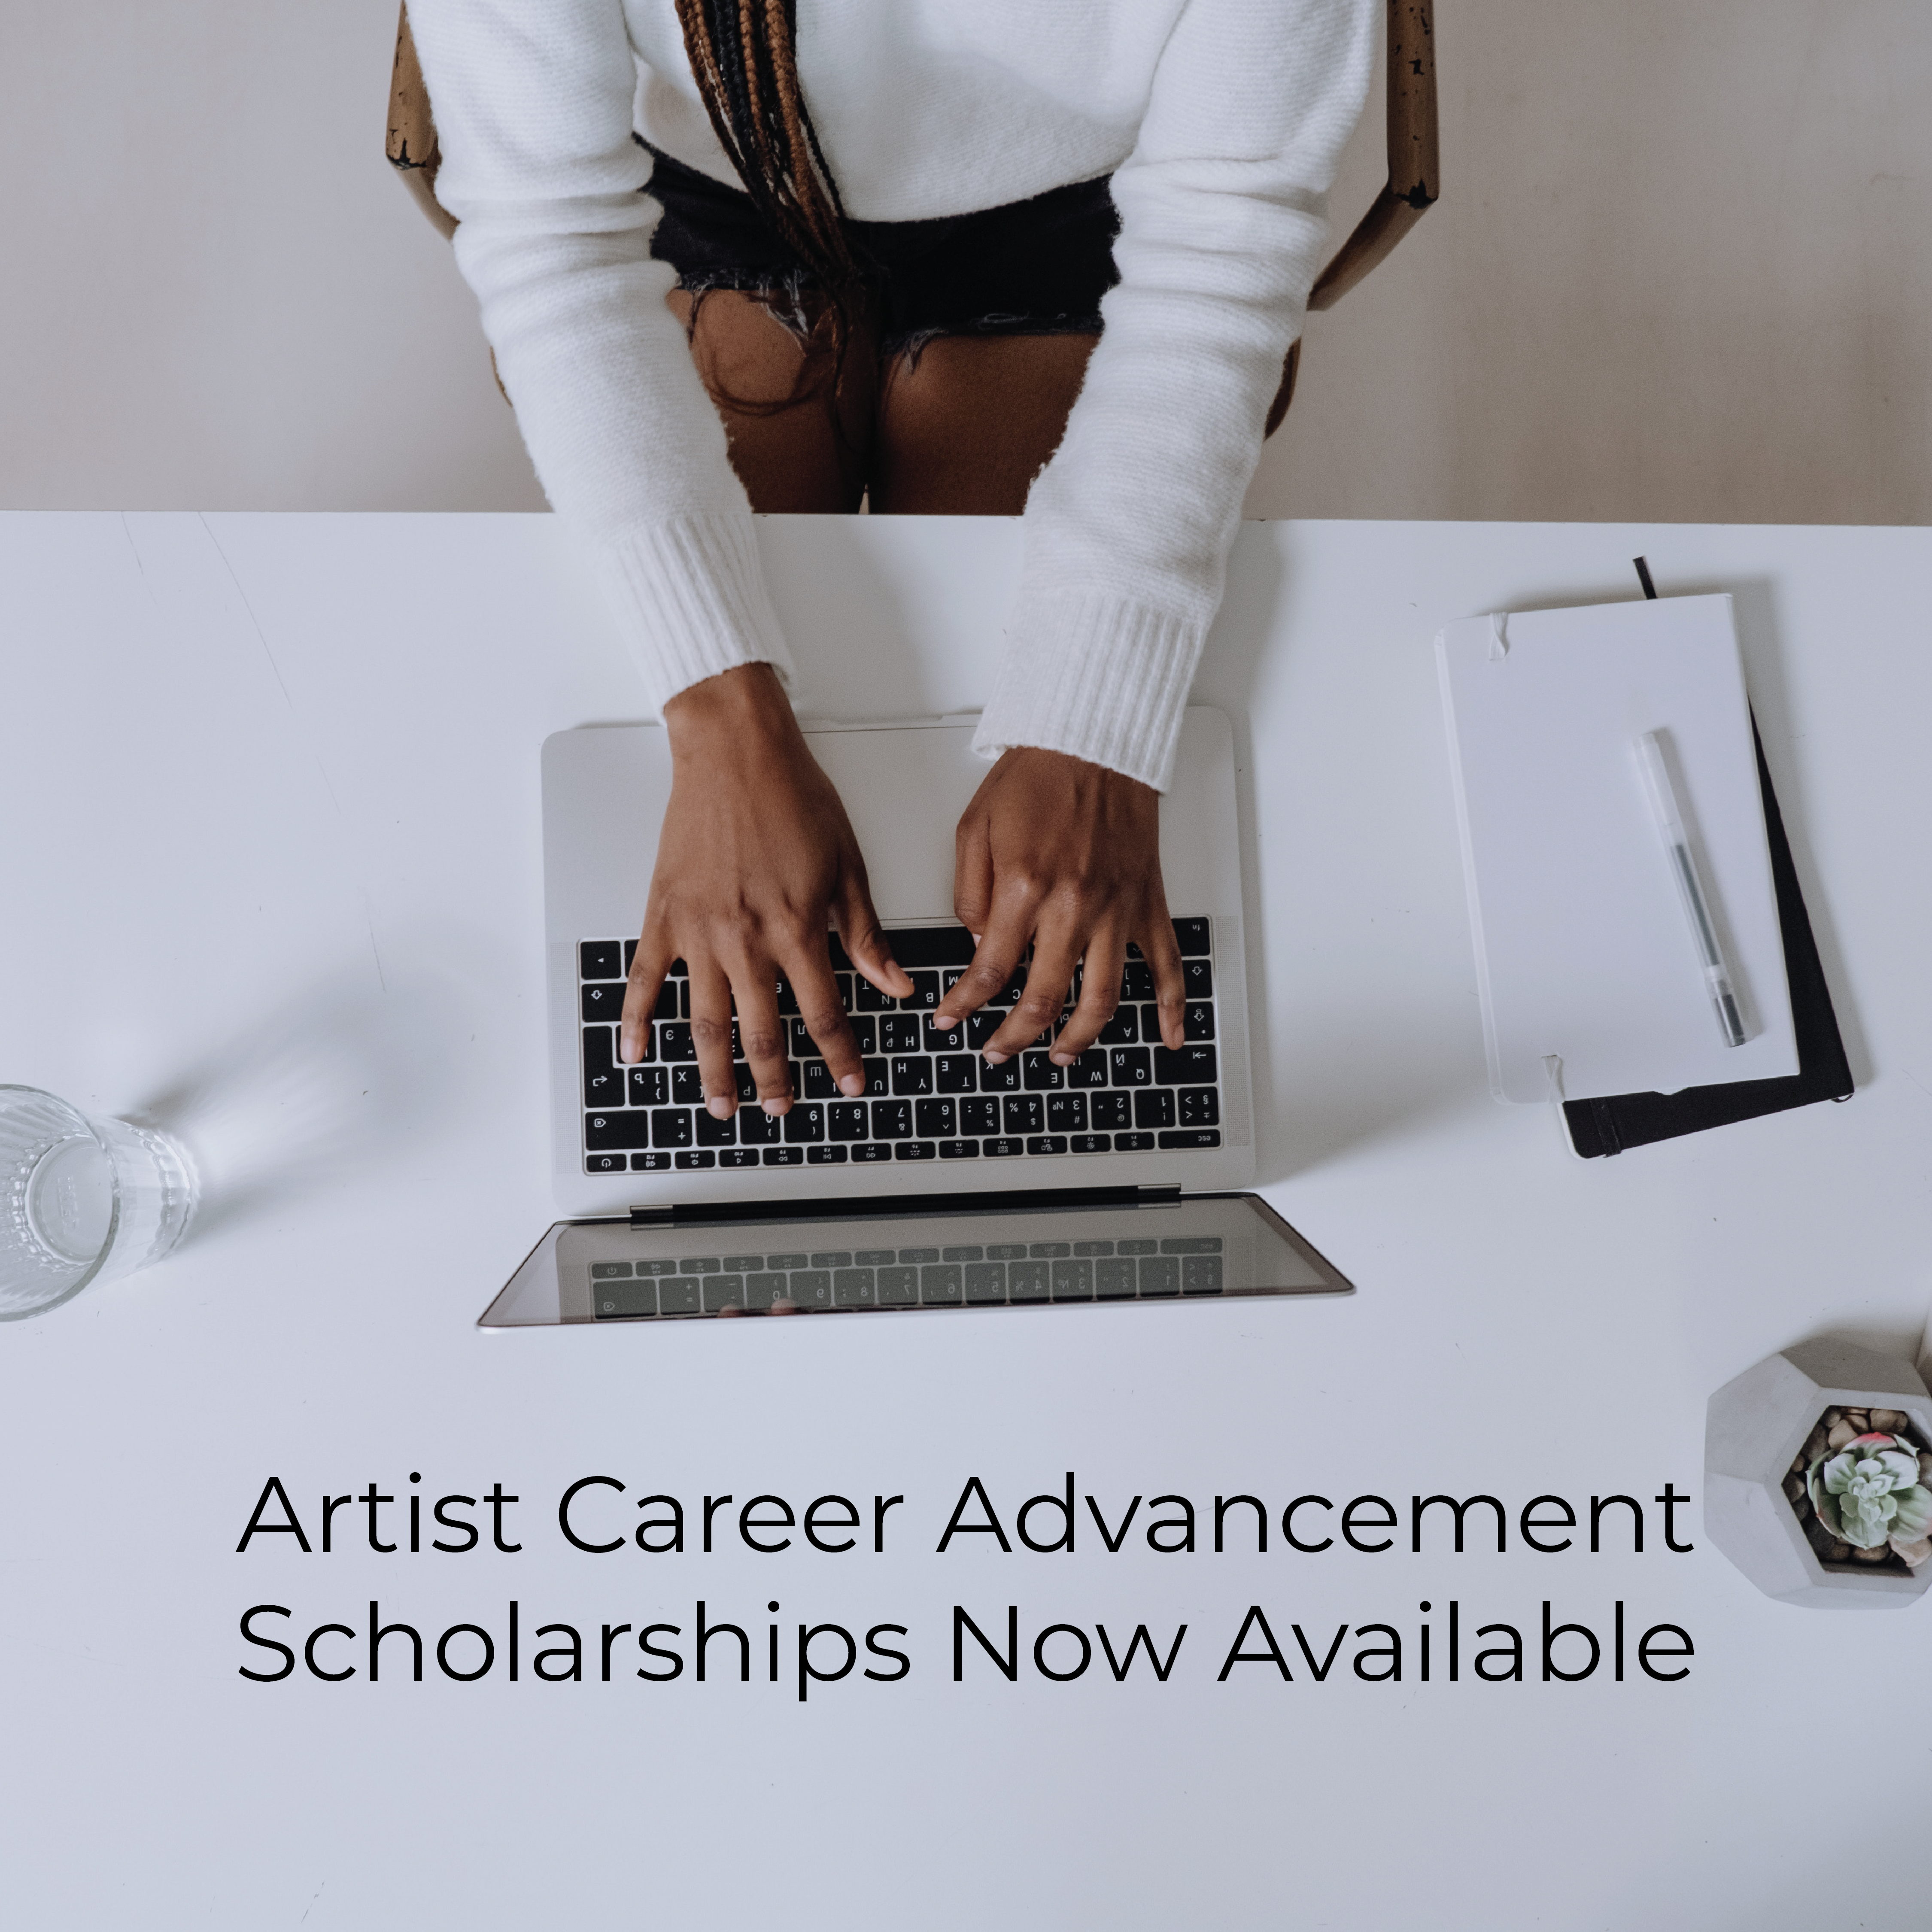 Artist Career Advancement Scholarships Now Available.